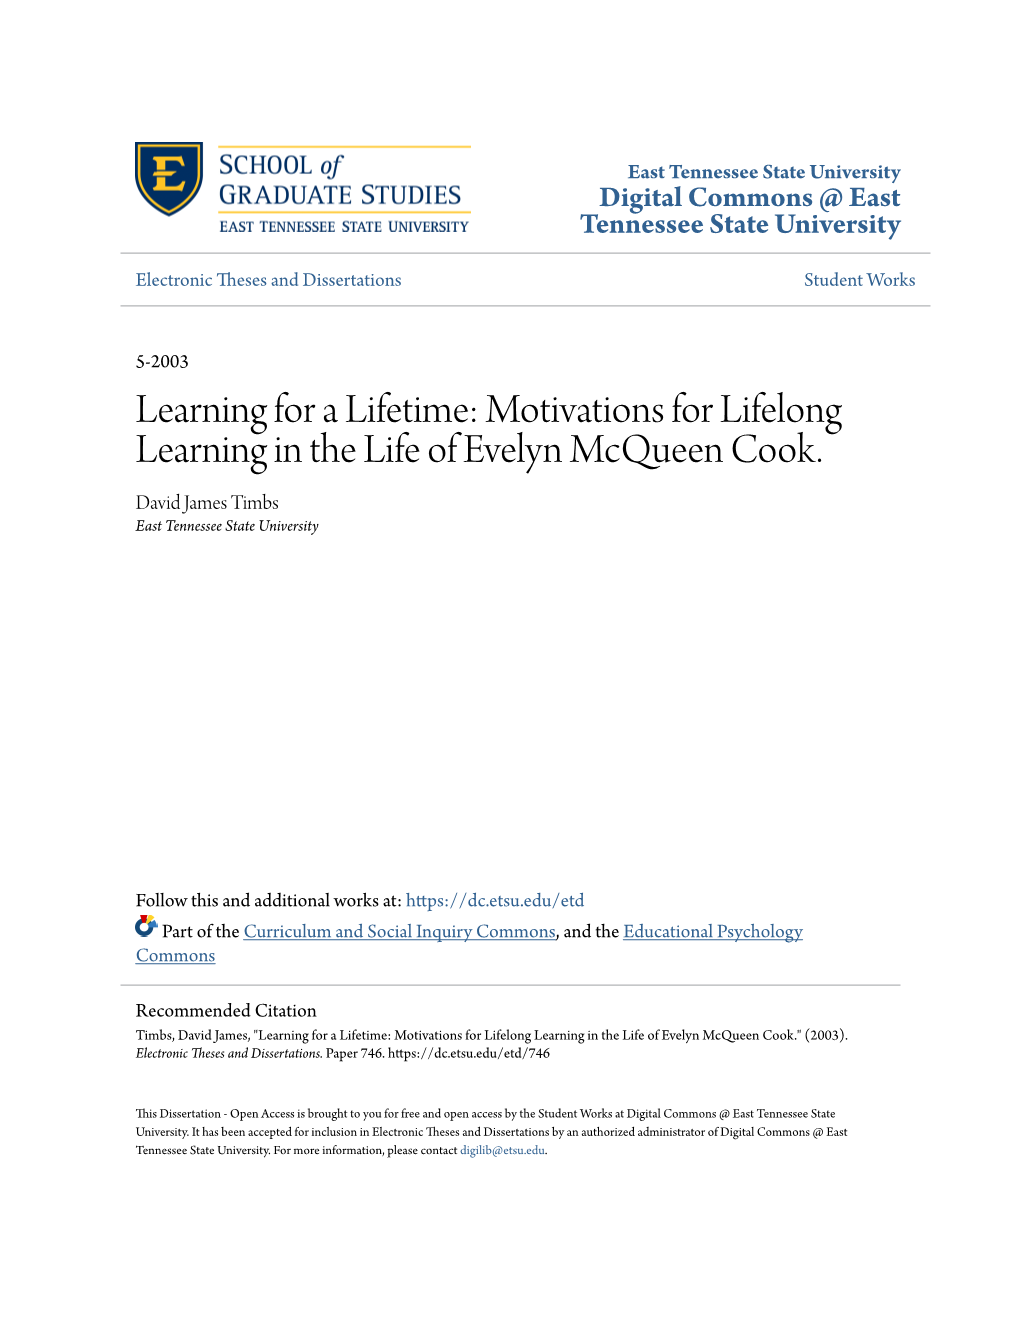 Motivations for Lifelong Learning in the Life of Evelyn Mcqueen Cook. David James Timbs East Tennessee State University